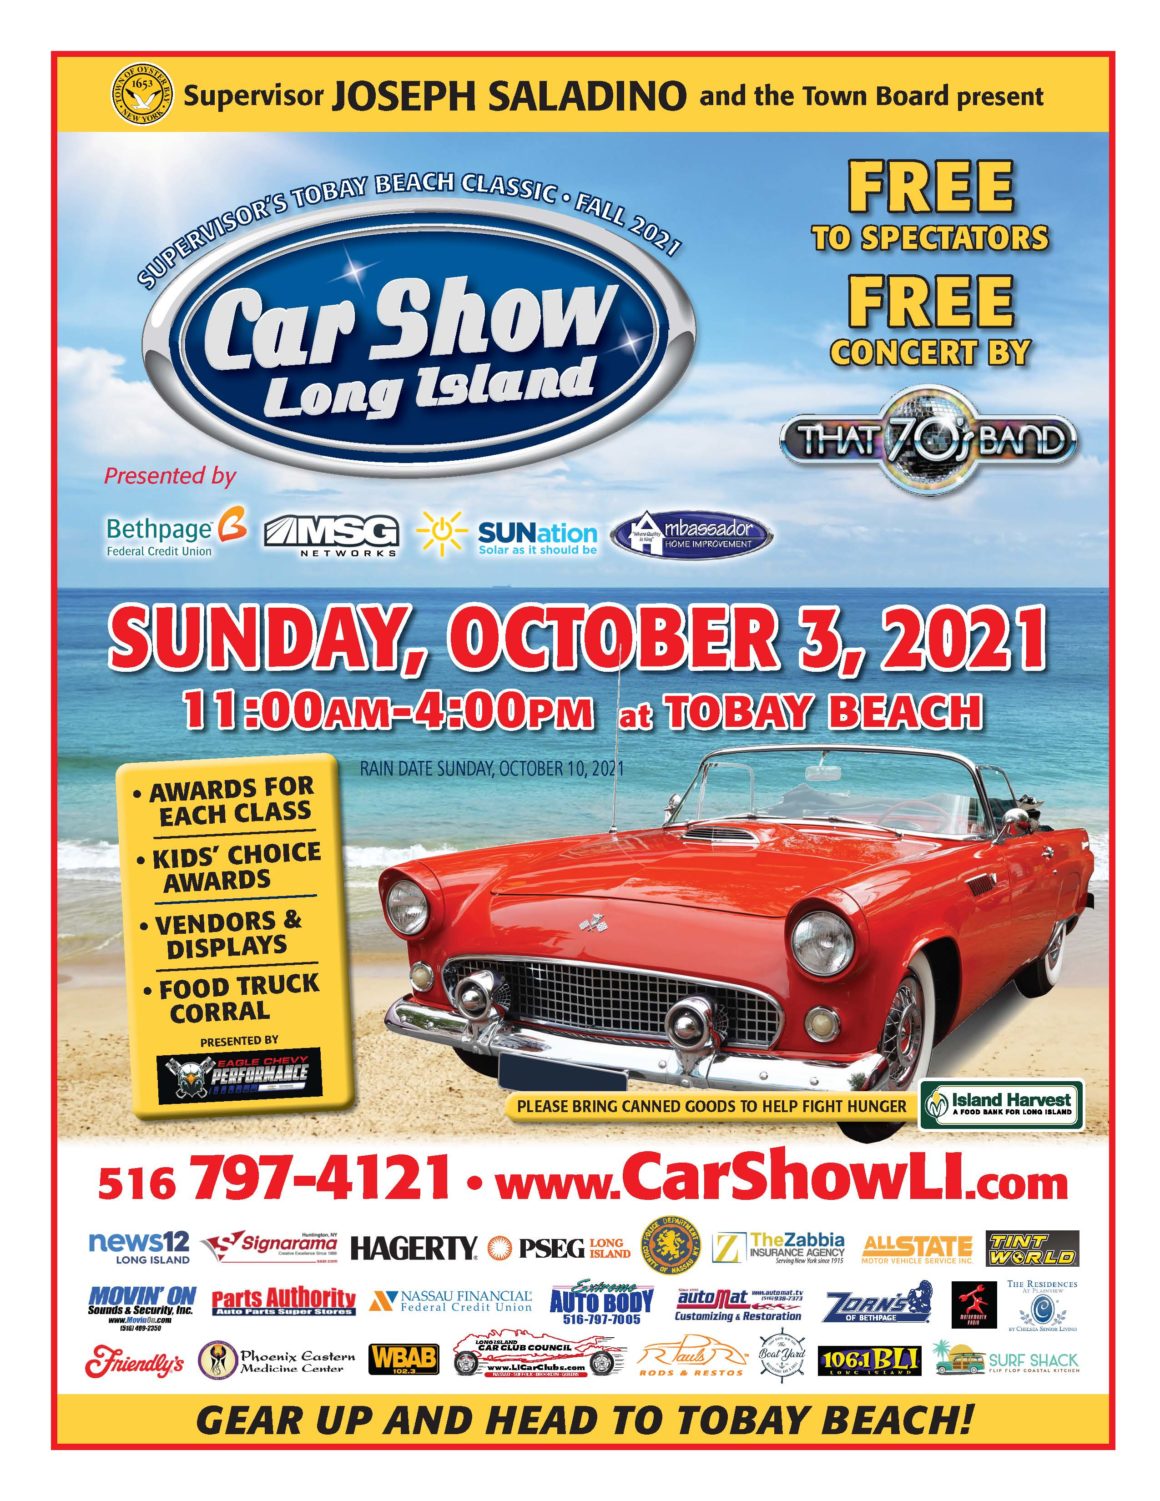 Long Island’s Largest Car Show Takes Place Sunday, October 3rd at TOBAY Beach